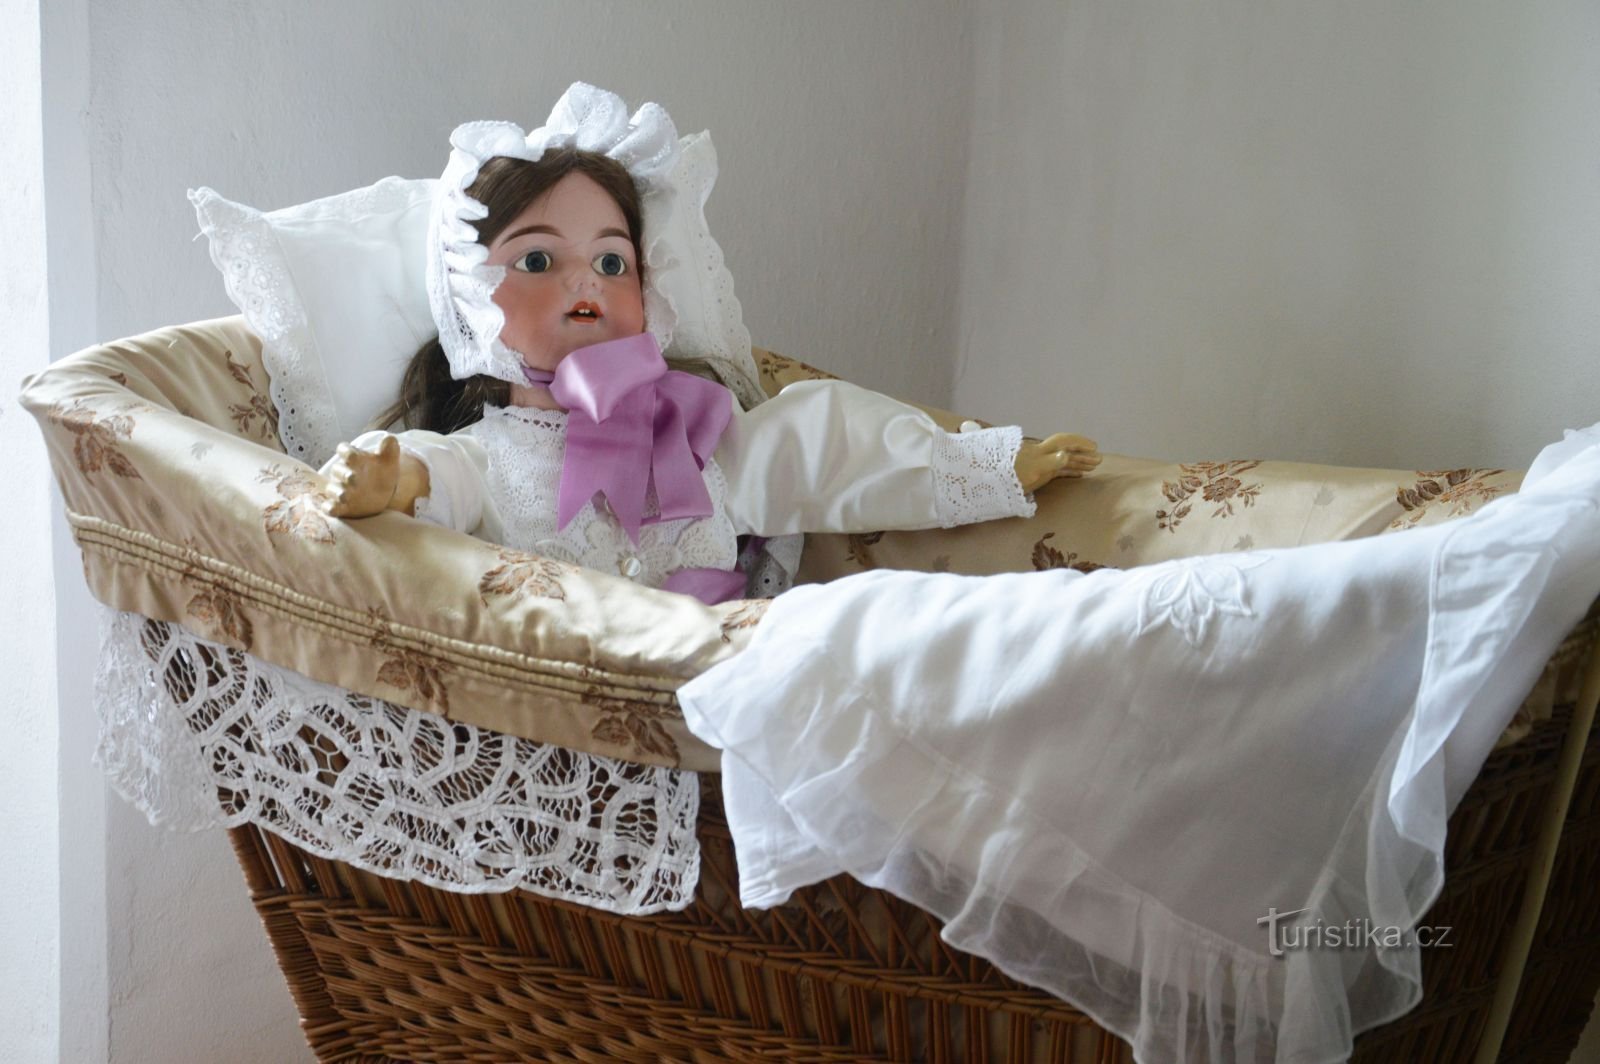 Perhaps you too will meet your favorite doll at the exhibition in the Votic monastery. Photo: